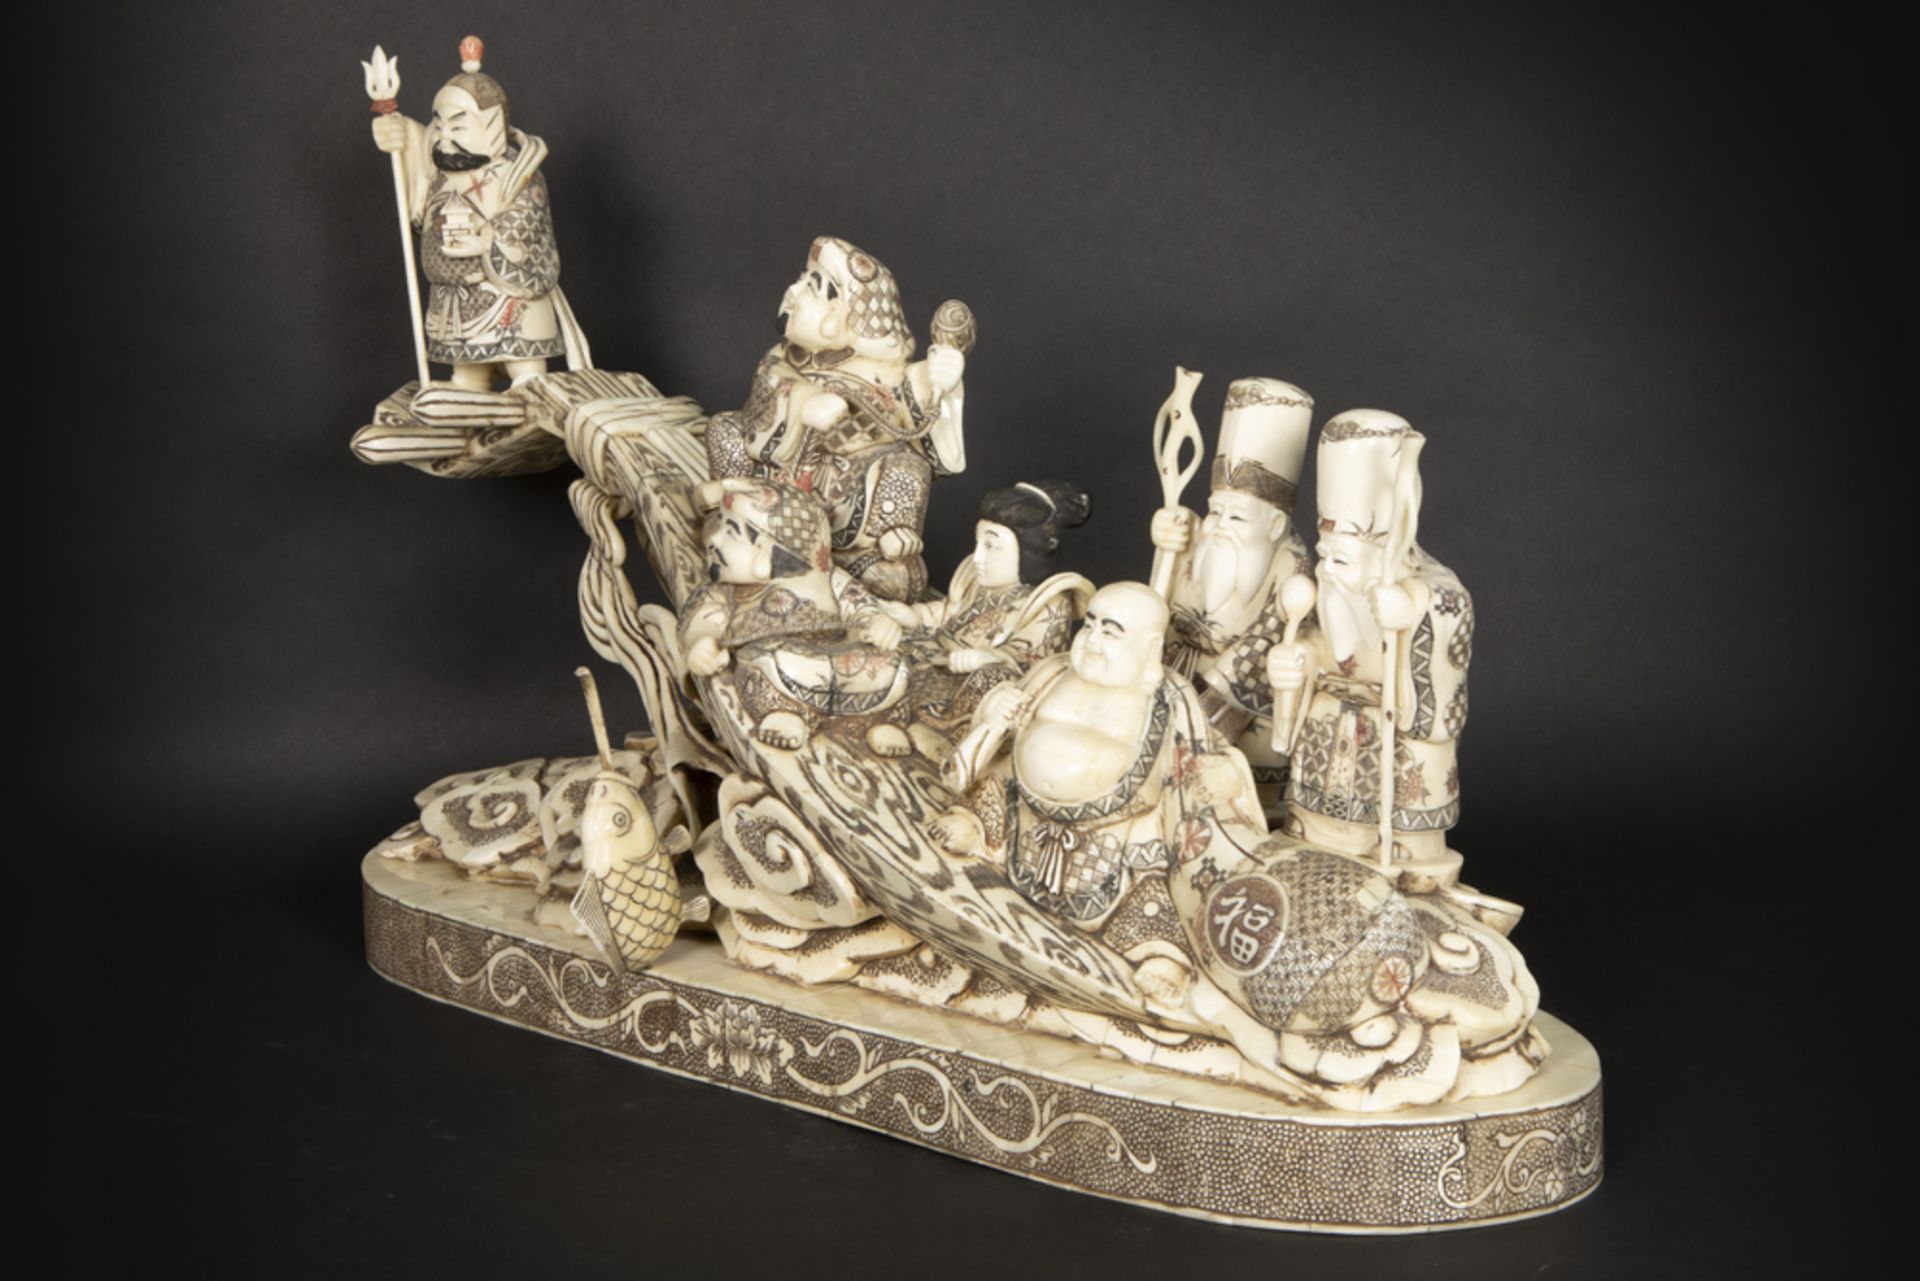 quite big Chinese sculpture with the depiction of seven Chinese mythological figures, sitting on a - Bild 4 aus 6